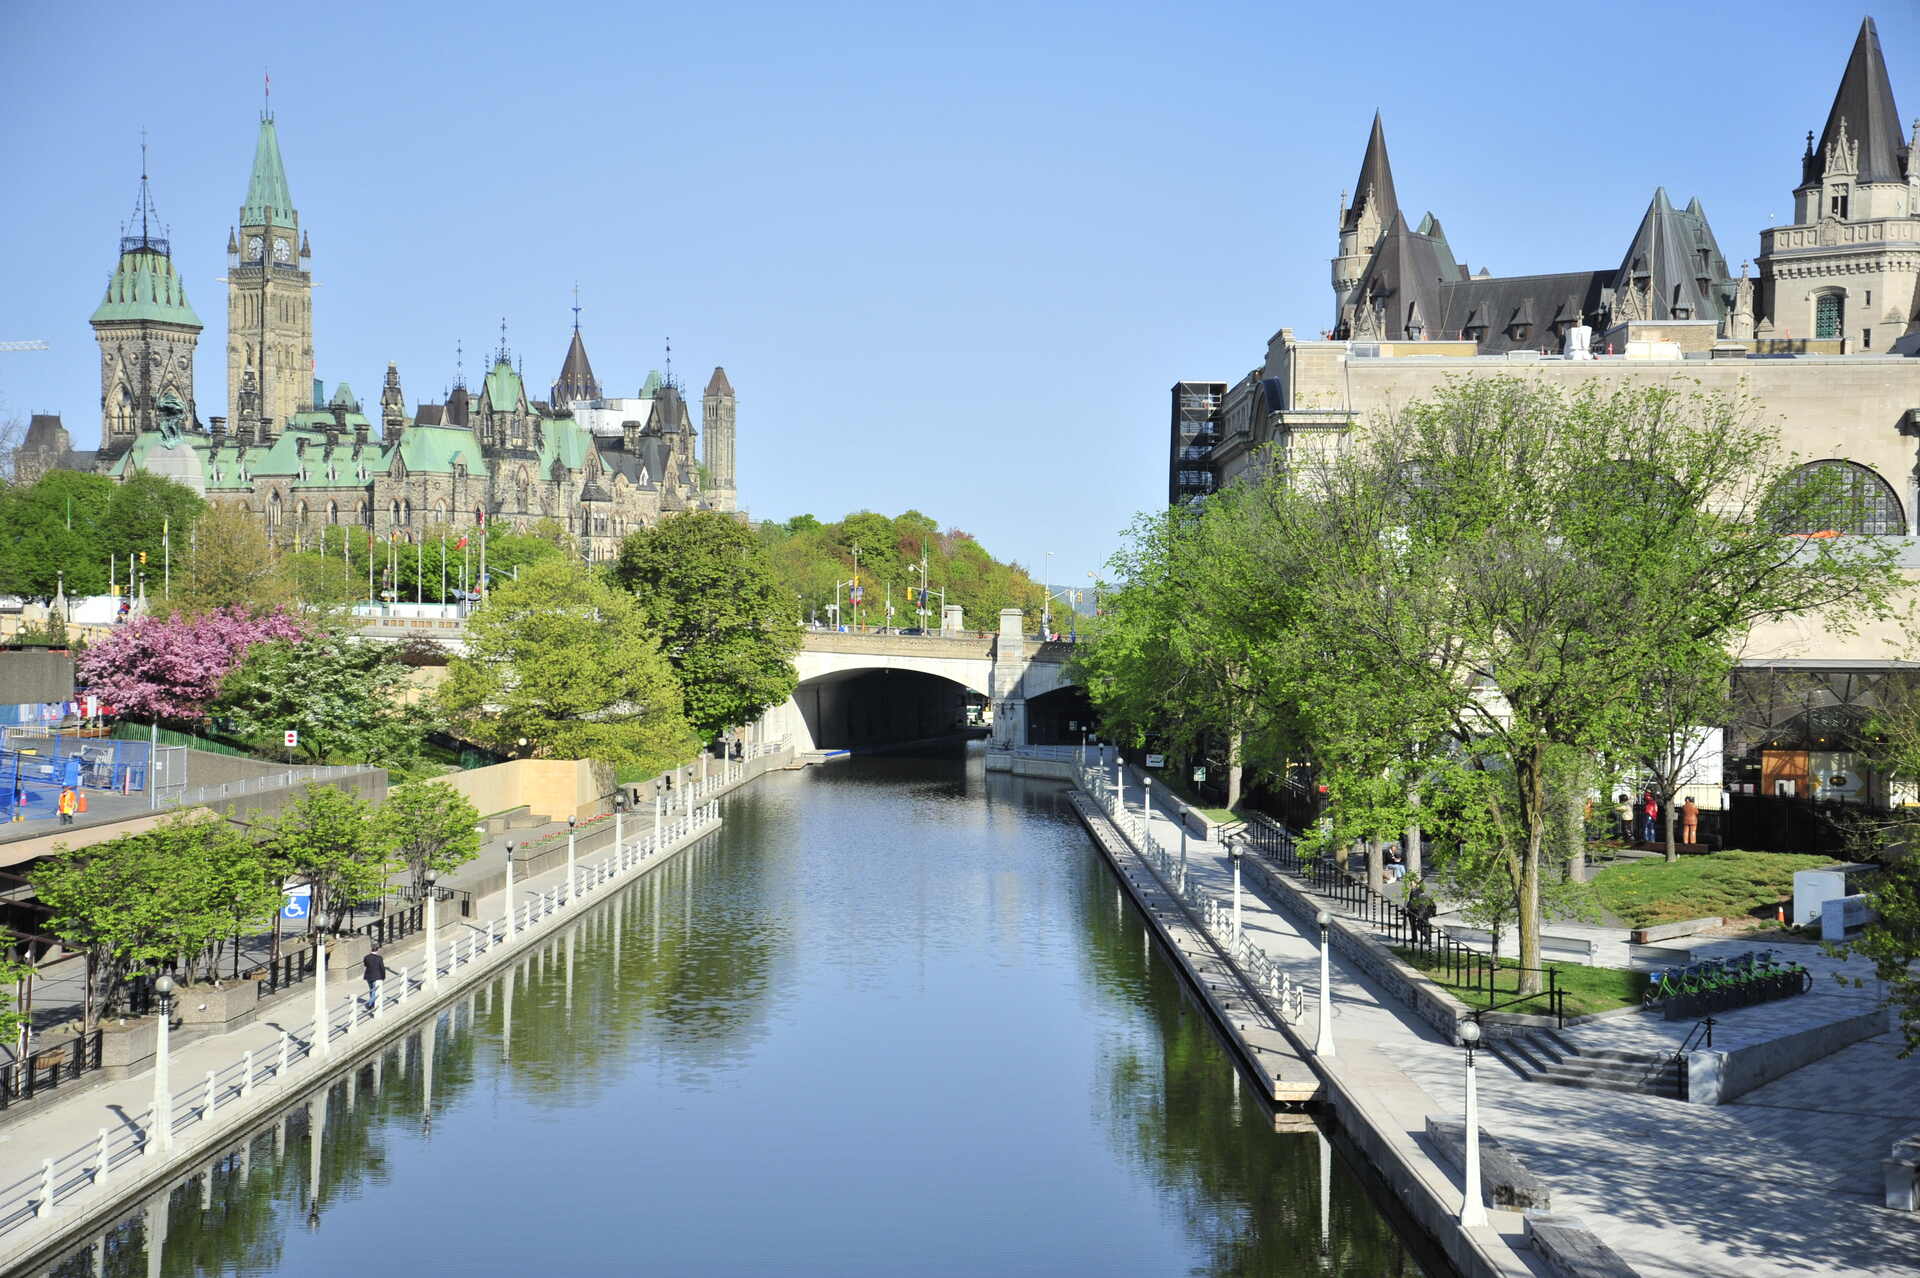 A view of the canal in Ottawa, Canada